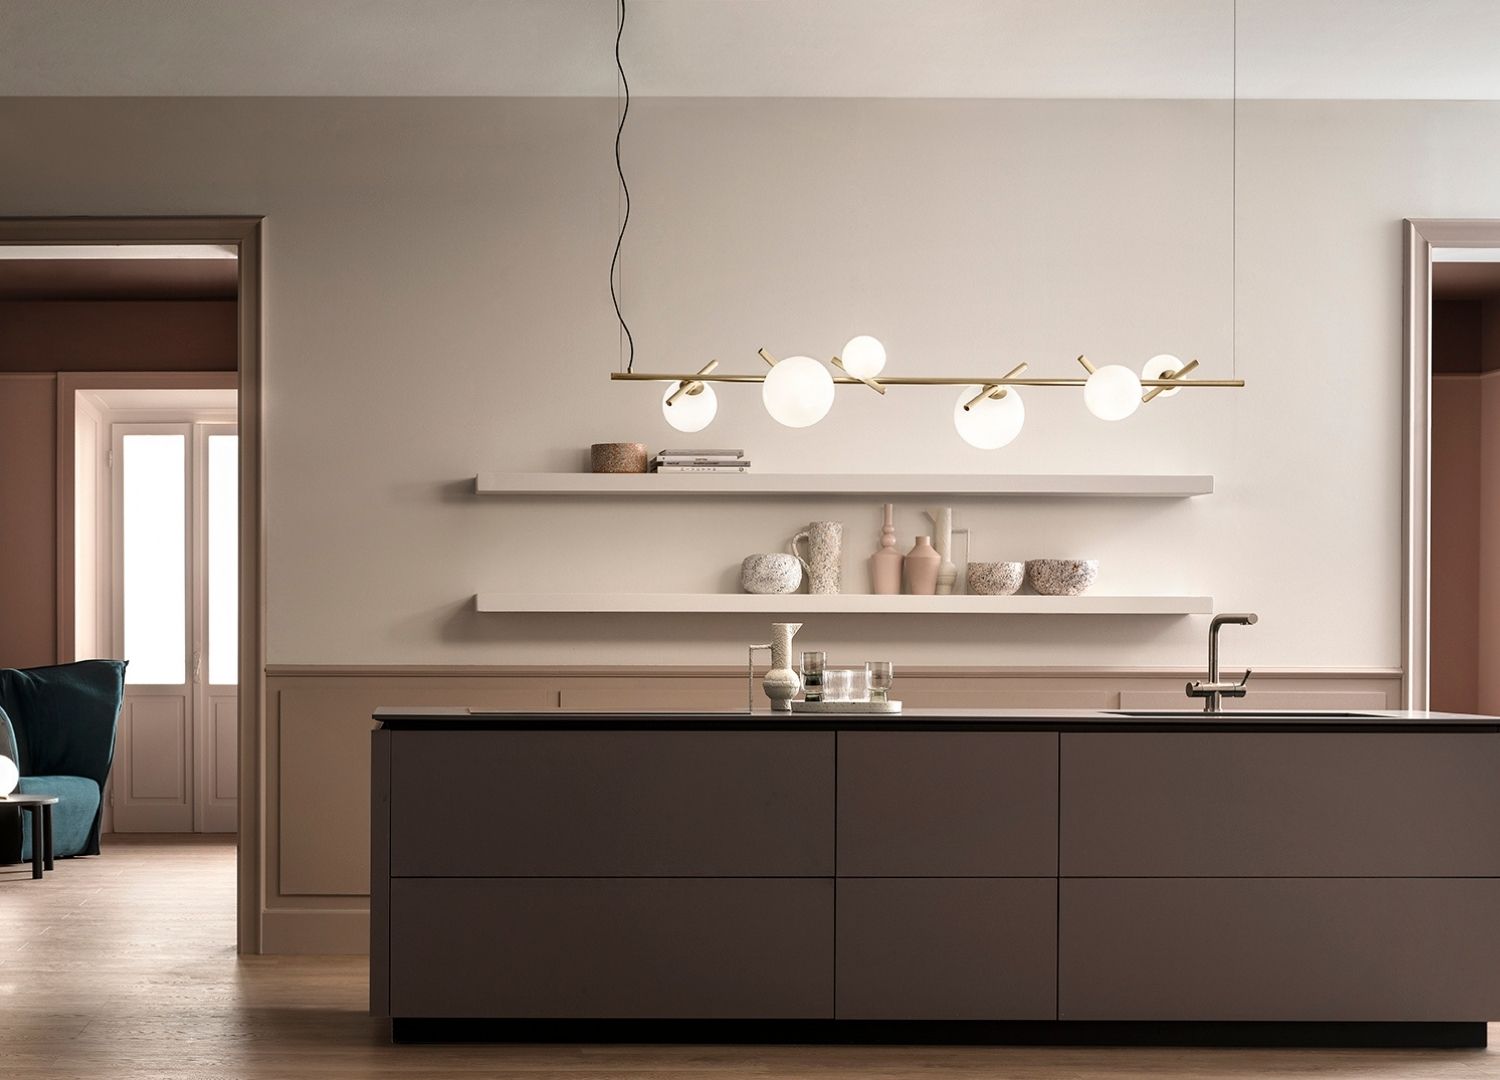 Posy Luxury Suspension Chandelier from Masiero, Italy in a Kitchen interior available at Spacio India for luxury home decor collection of Decorative Lighting